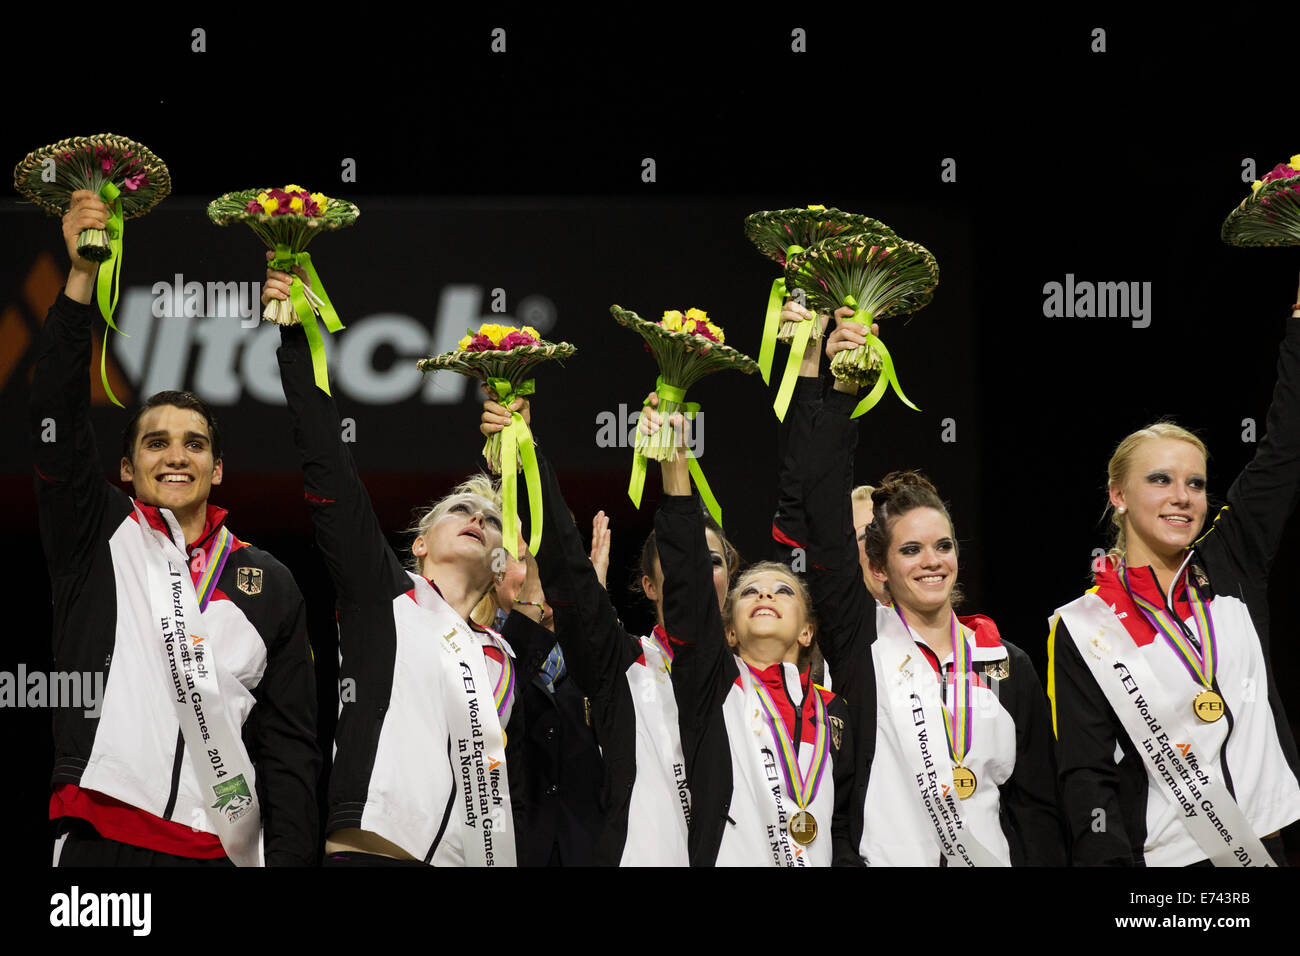 Caen, France. 05th Sep, 2014. Johannes Kay (L-R), Julia Dammer, Pauline Riedl, Mona Pavetic, Jessica Schmitz (hidden), Janika Derks and Milena Hiemann of Germany celebrate on the podium after the Vaulting competition during the World Equestrian Games 2014 in Caen, France, 05 September 2014. The german team won the gold medal. Photo: Rolf Vennenbernd/dpa/Alamy Live News Stock Photo